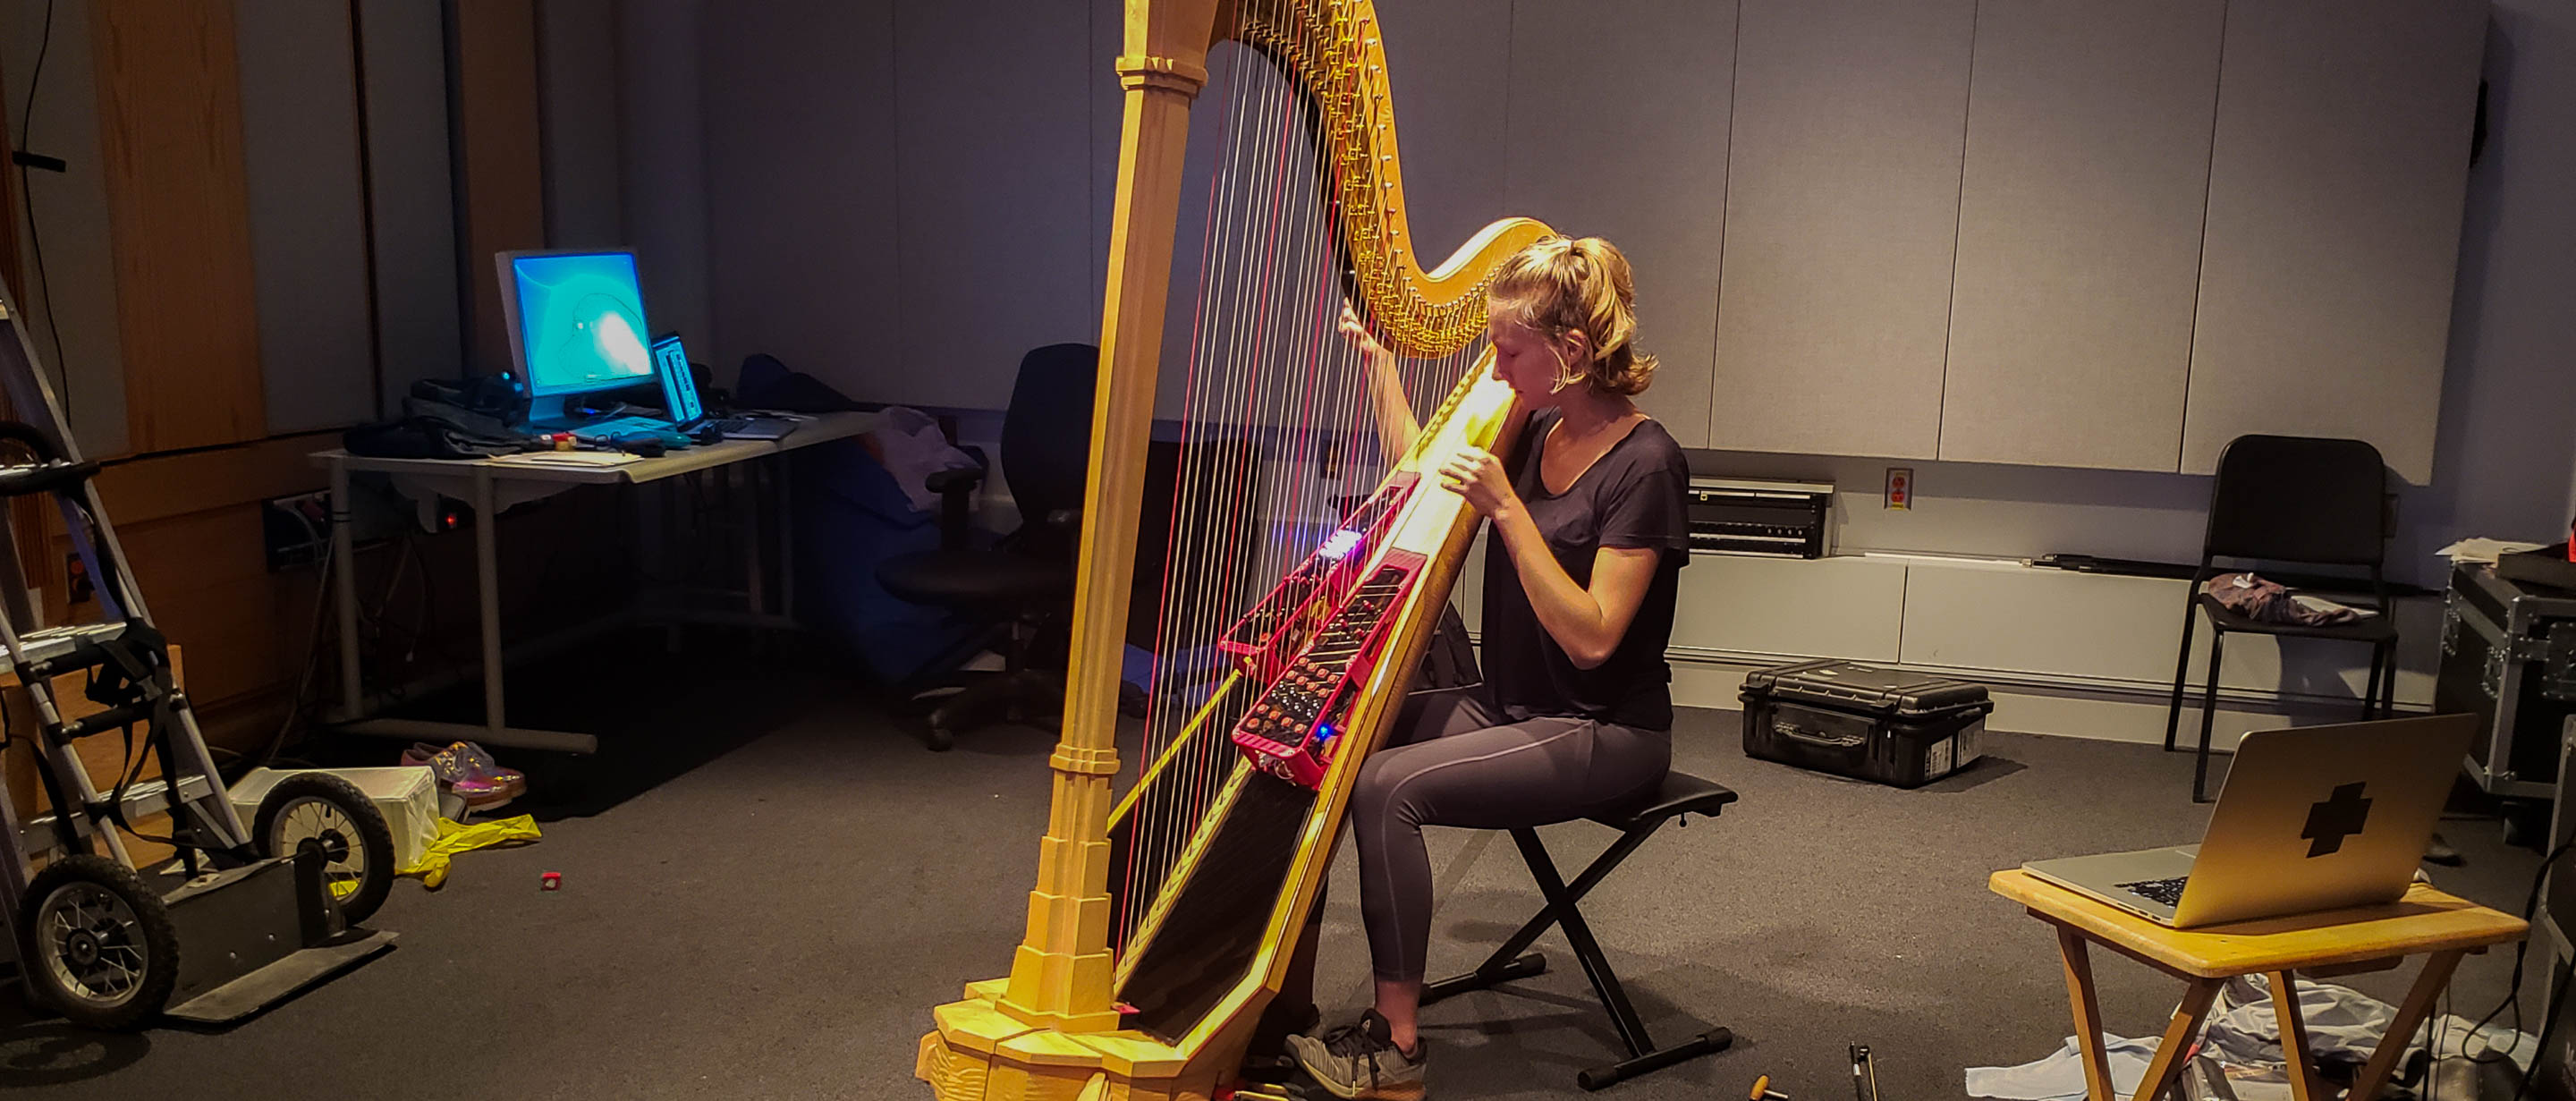 A woman sitting in the middle of a large but messy research studio. She is playing a concert harp that is equipped with two electronic controllers that are fitted on either side of the harp strings. They rise up at an angle from the soundboard, and each has a layout of several knobs, buttons, and sliders. The units are made of red 3D printed frames and black acrylic panels. Around the room is strewn a large amount of research equipment: computers, black cases, a violin bow, and other miscellaneous objects.